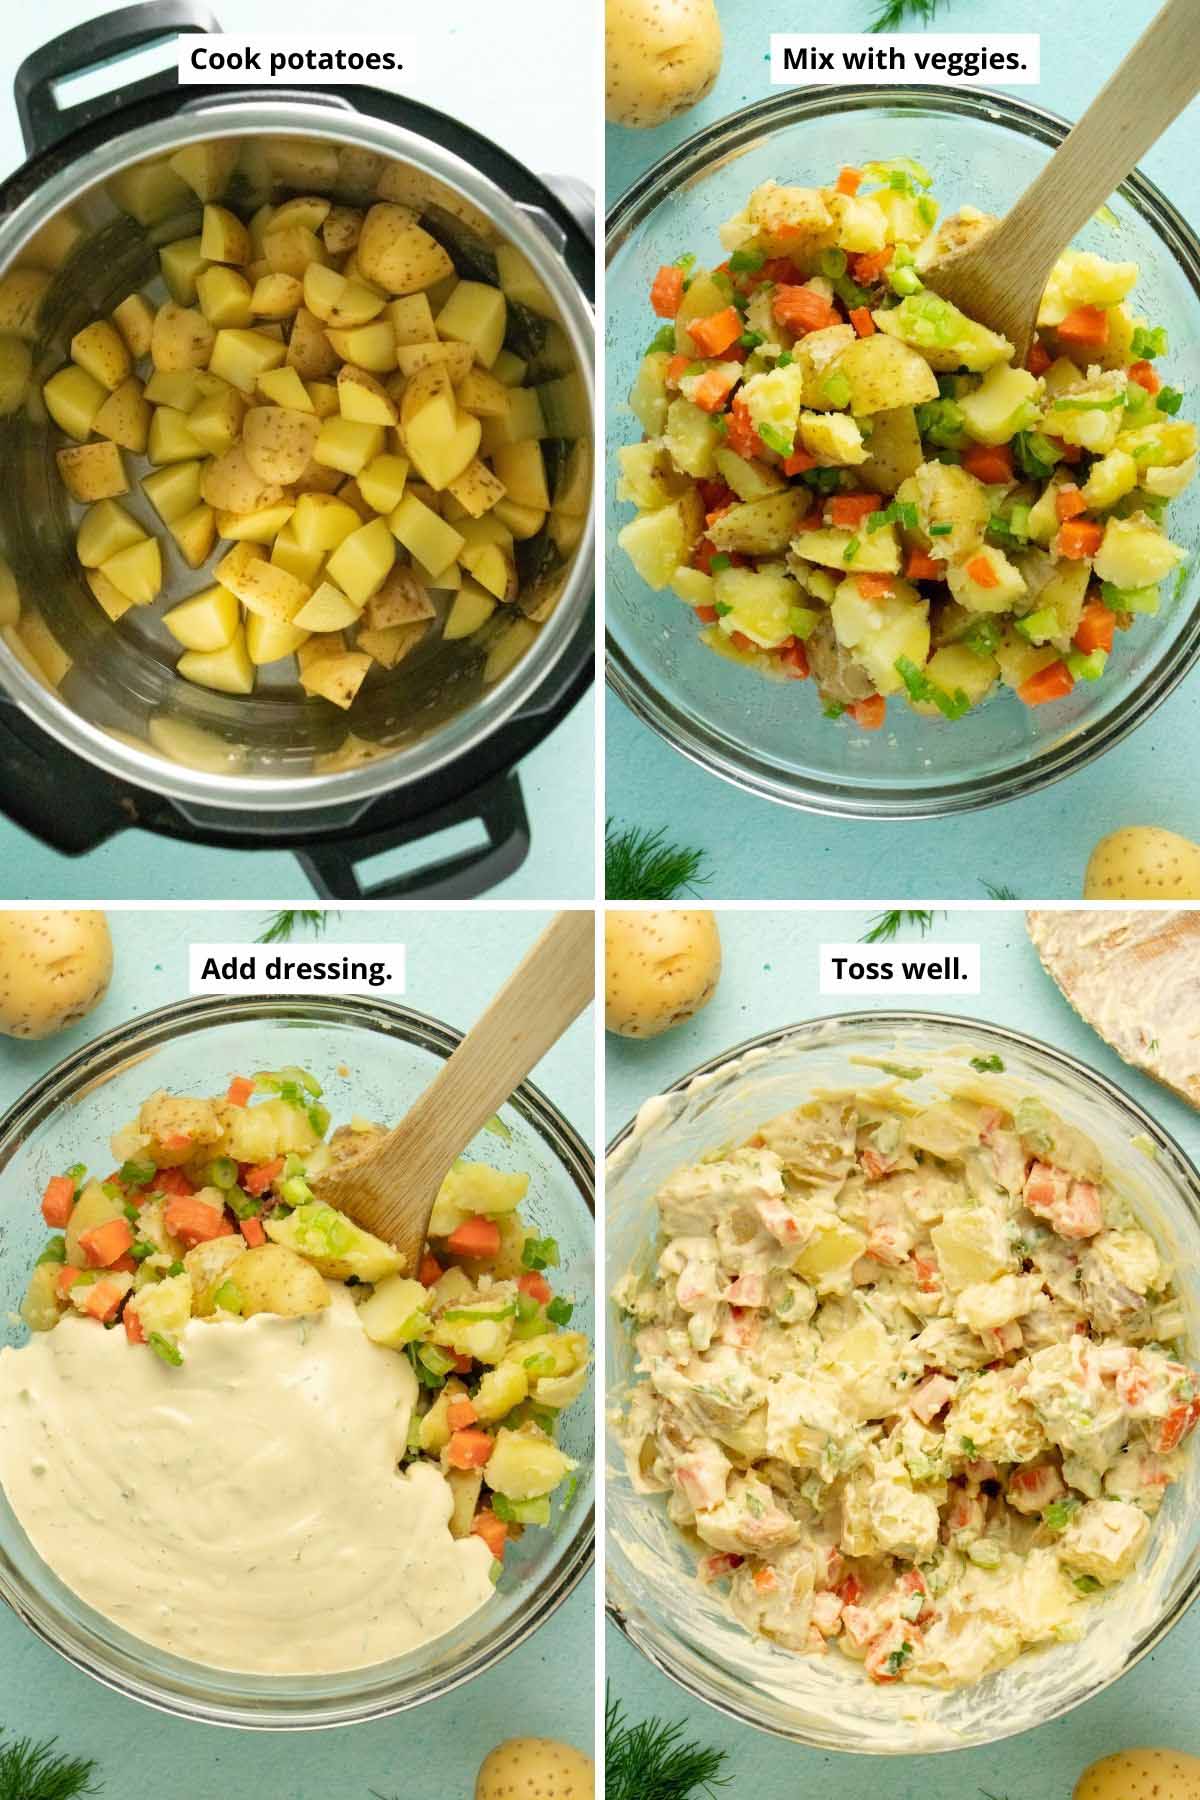 image collage showing cooked potato pieces in the Instant Pot, the potatoes and veggies mixed up in the bowl, adding the dill dressing, and the creamy vegan potato salad after mixing together